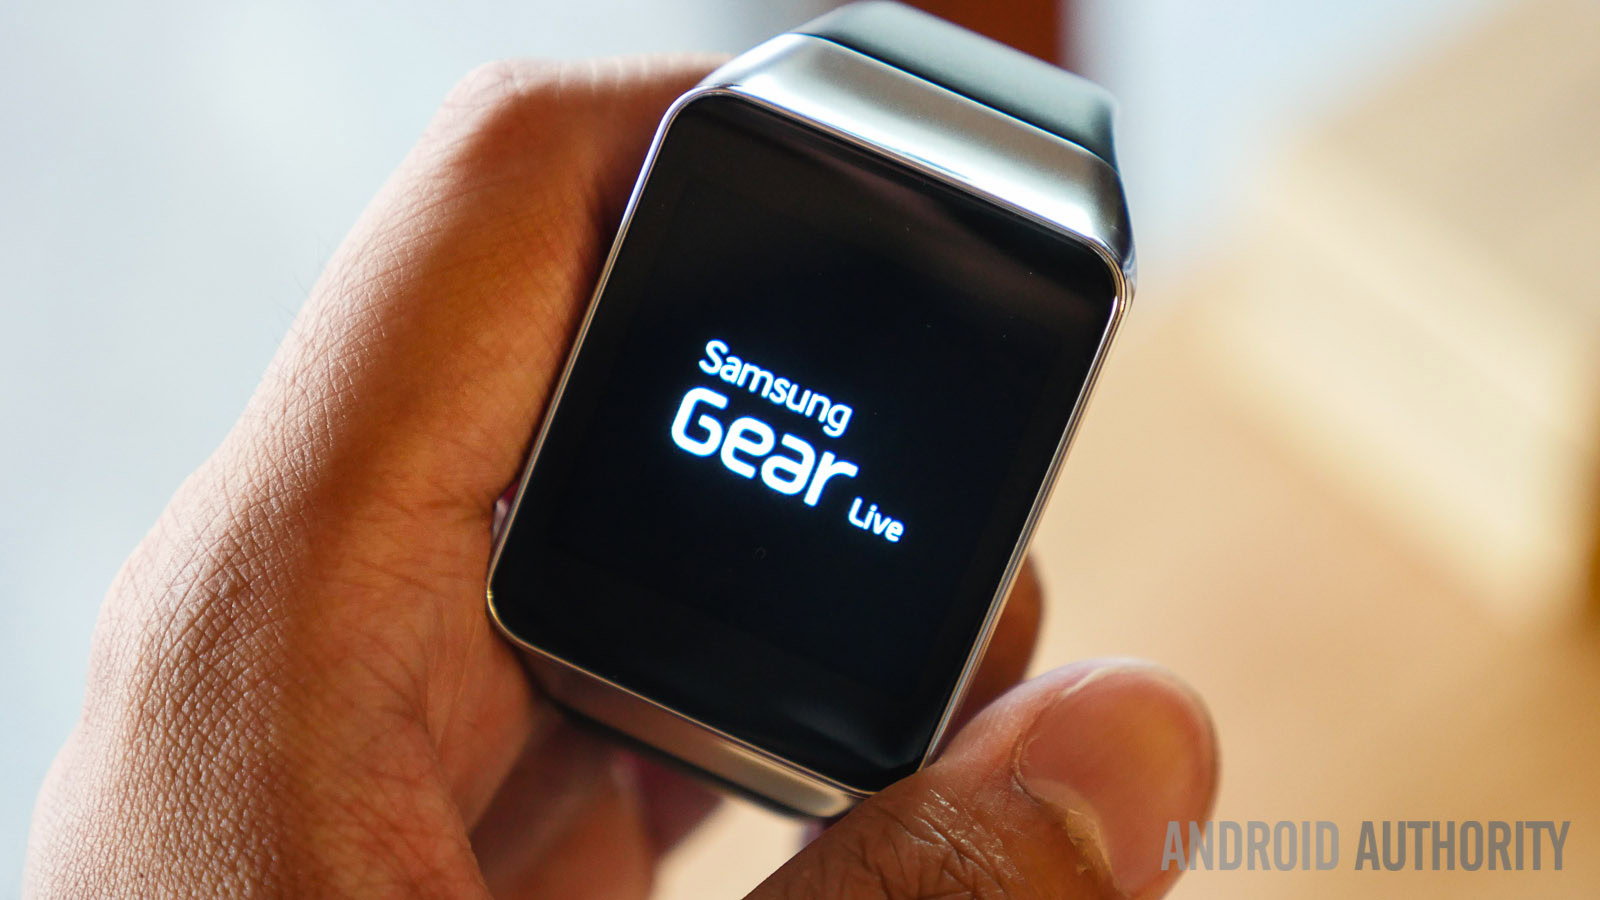 samsung gear live unboxing aa (14 of 15)